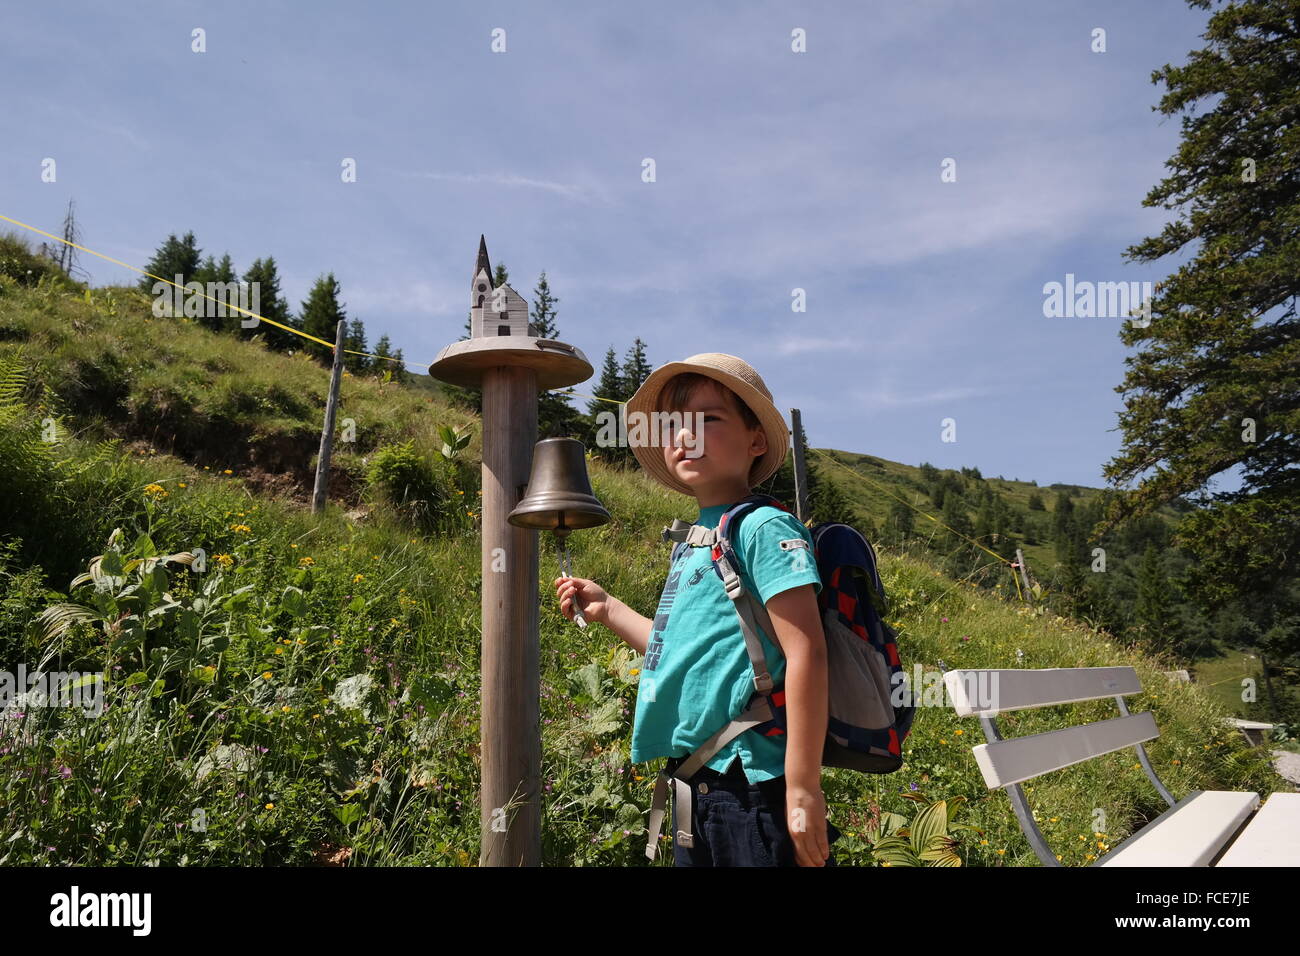 Boy With Back Pack Ringing Bell On Landscape Stock Photo